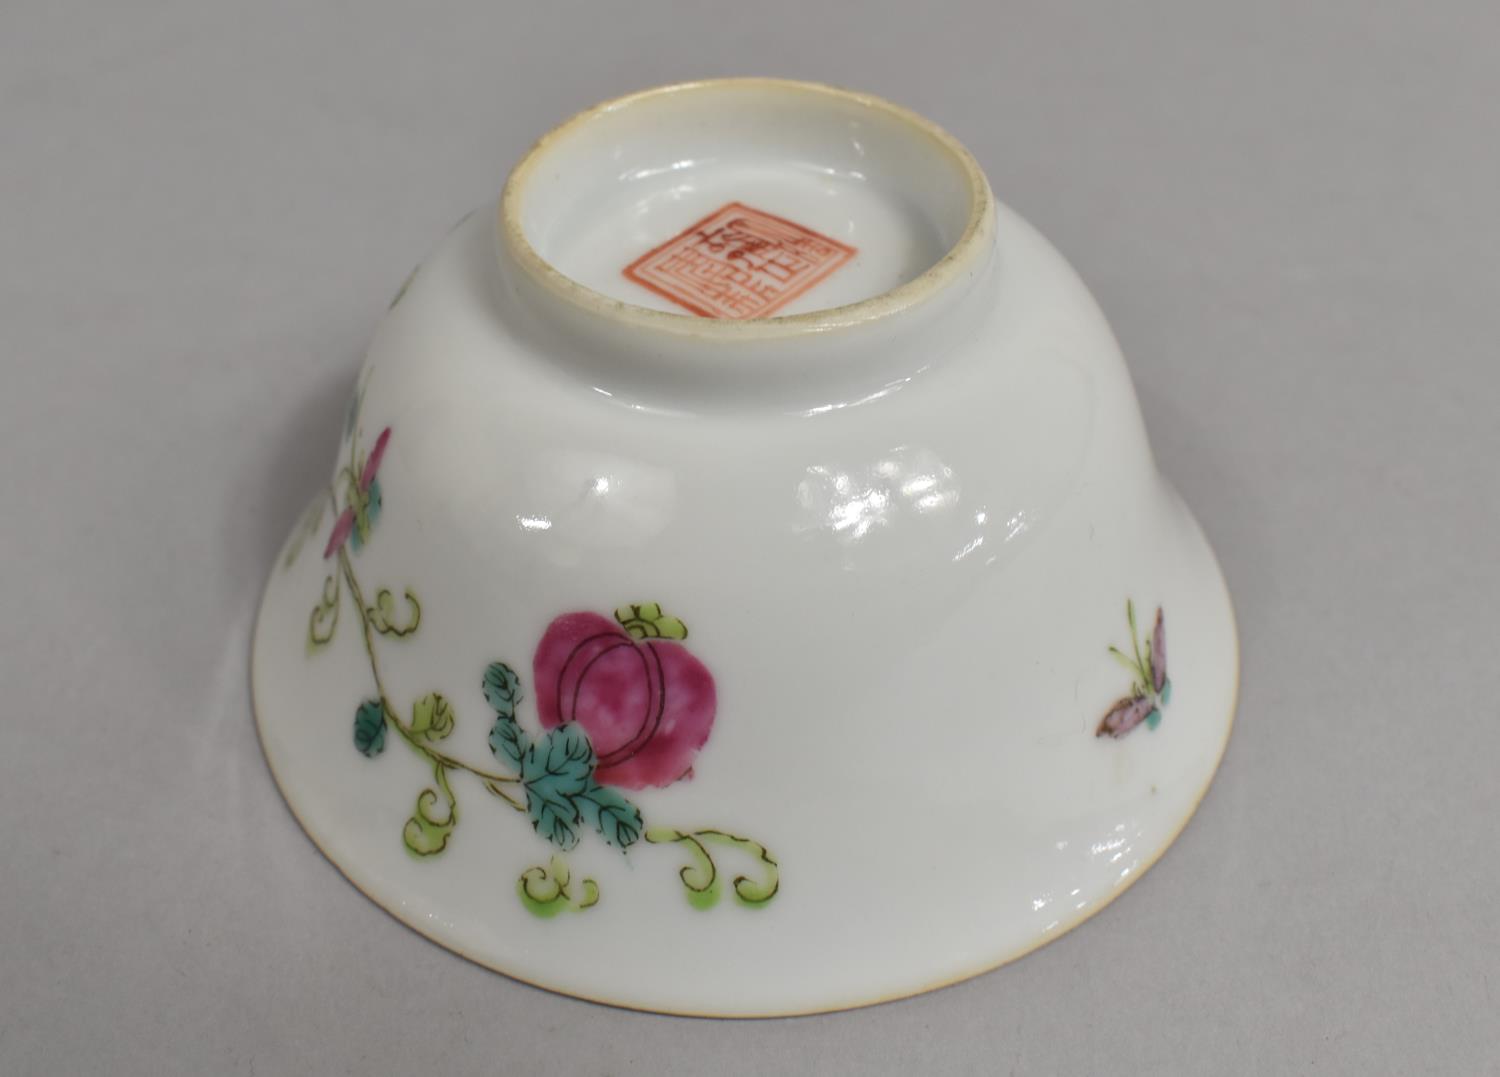 A Small Late 19th/Early 20th Century Chinese Porcelain Tea Bowl Decorated in the Famille Rose - Image 3 of 5